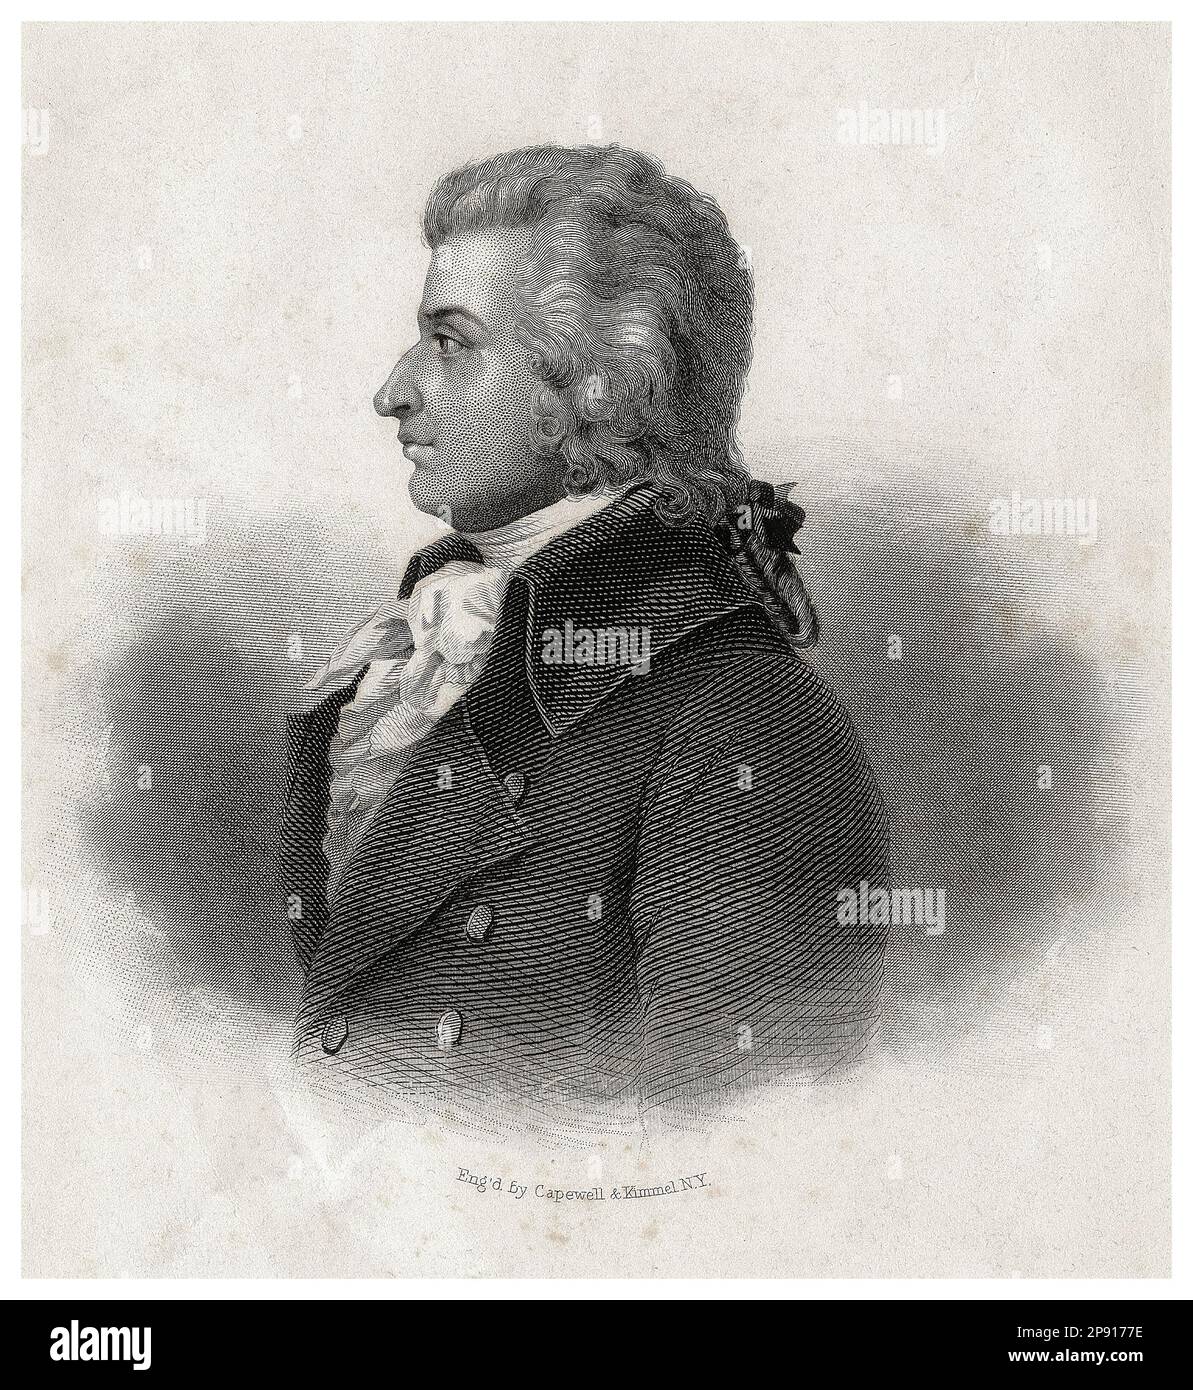 Wolfgang Amadeus Mozart (1756-1791), Compositore, incisione ritratto di Capewell & Kimmell, 1850-1869 Foto Stock